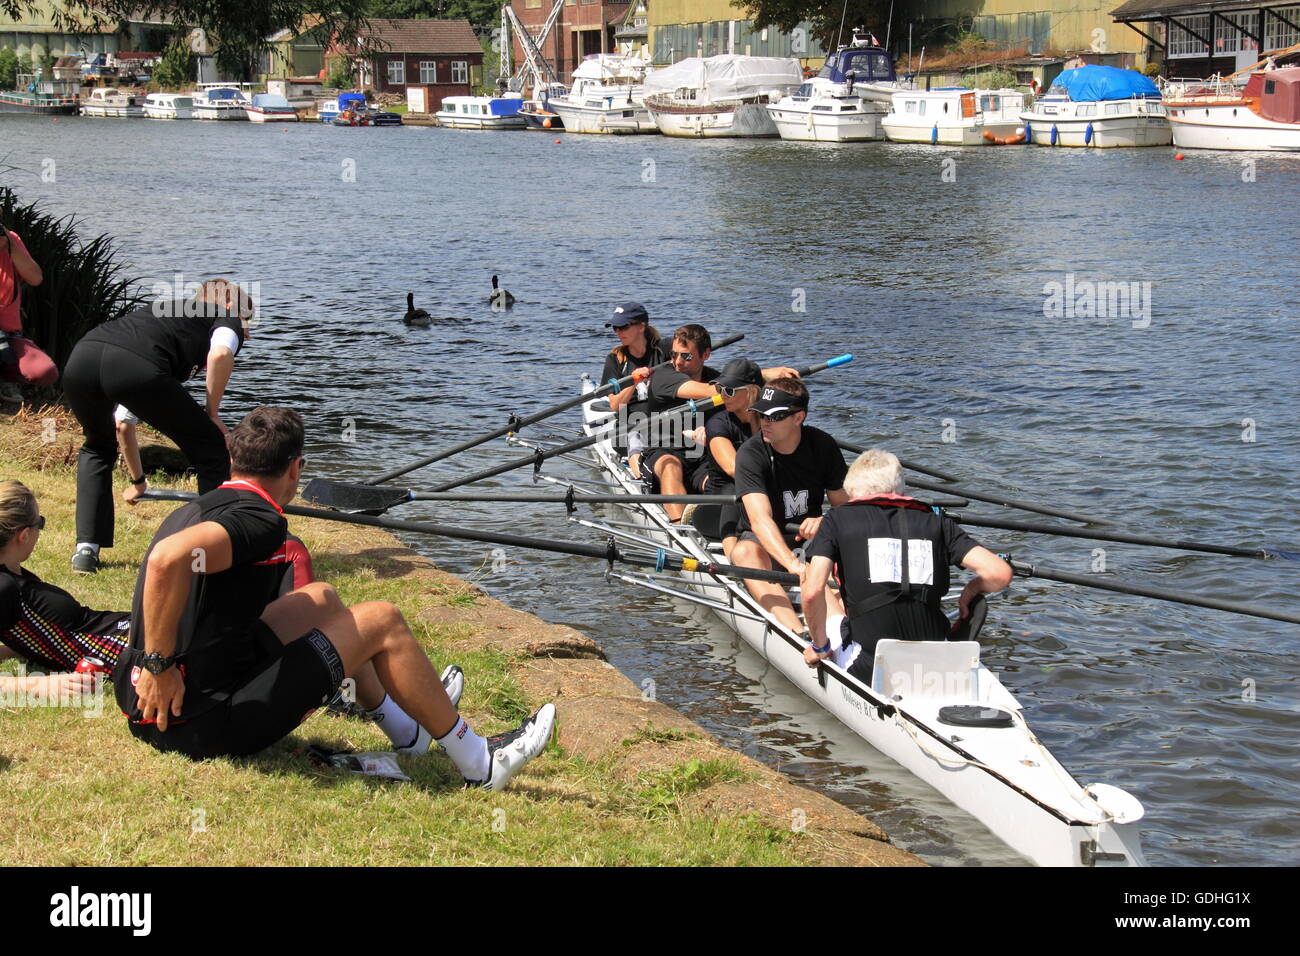 Molesey Mayhem Explore launches. Molesey Amateur Regatta, 16th July 2016, River Thames, Hurst Park Riverside, East Molesey, near Hampton Court, Surrey, England, Great Britain, United Kingdom, UK, Europe. Annual amateur rowing competition and social event established in 1867. Credit:  Ian Bottle/Alamy Live News Stock Photo